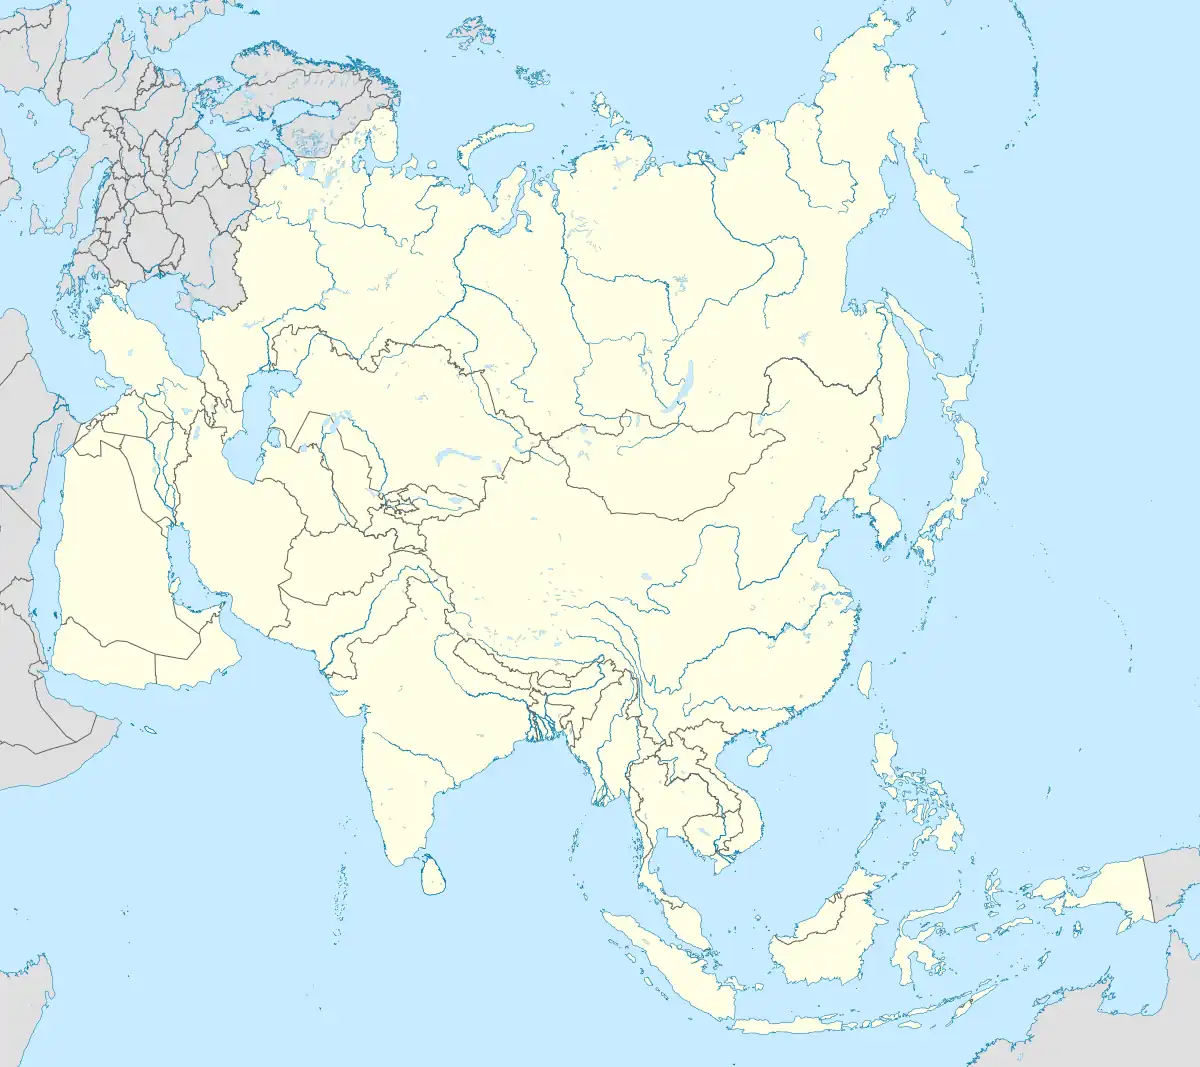 Jabrah is located in Asia